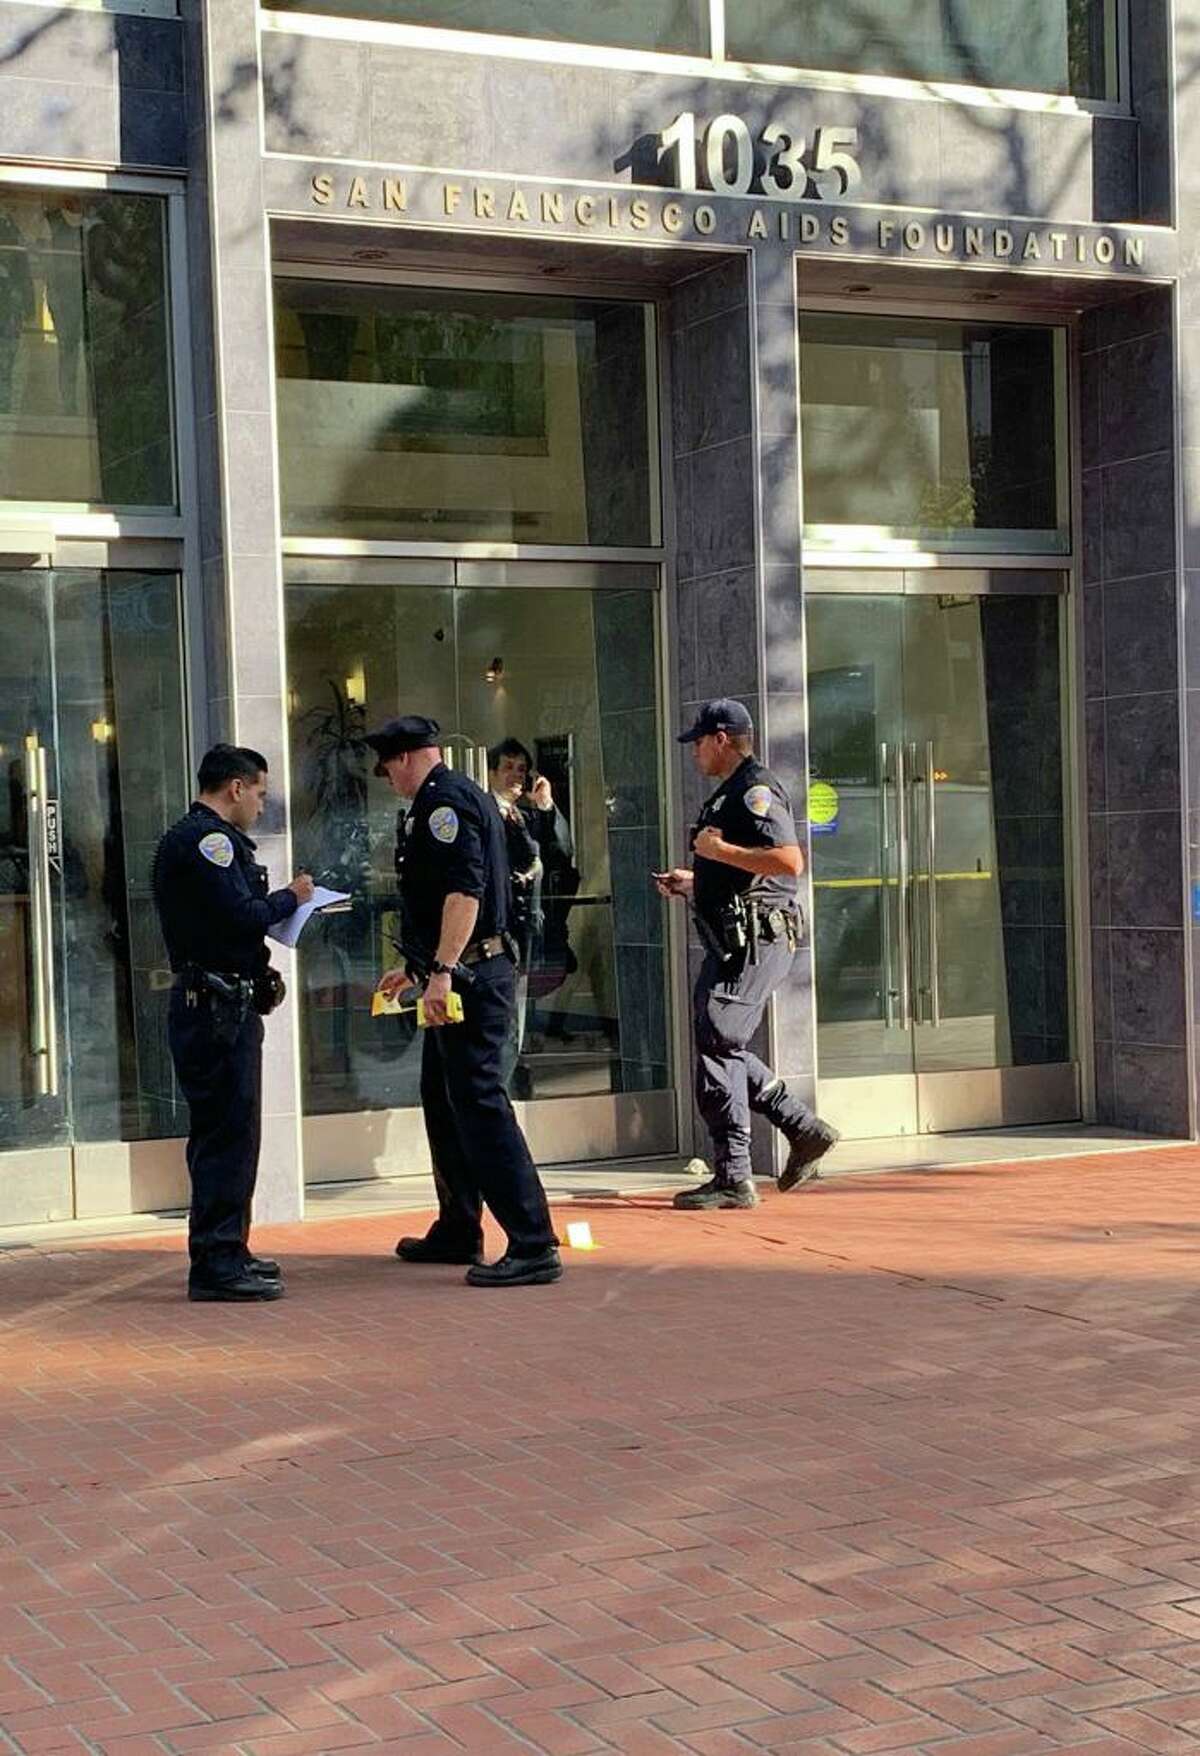 San Francisco police are investigate a shooting on Market Street that occurred during an altercation among several people Tuesday, August 20, 2019.